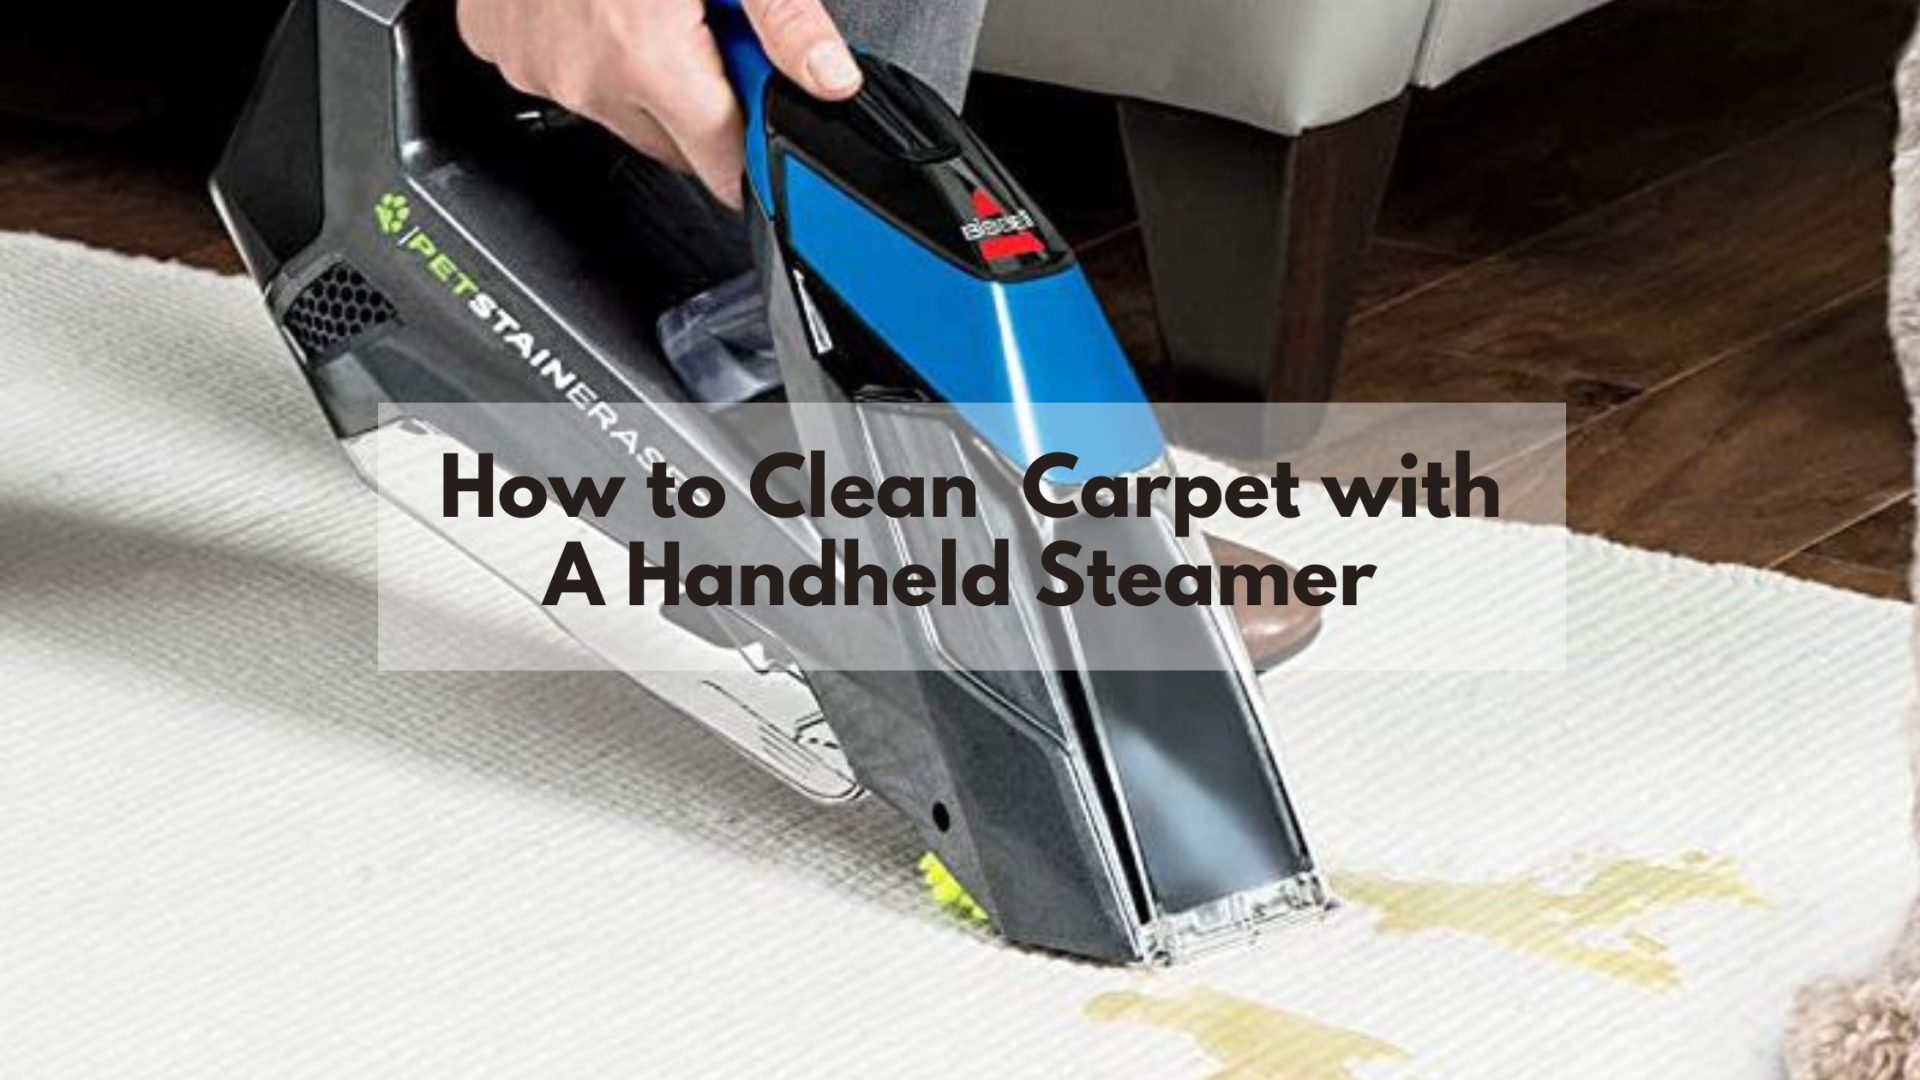 How to Clean Carpet with a Handheld Steamer